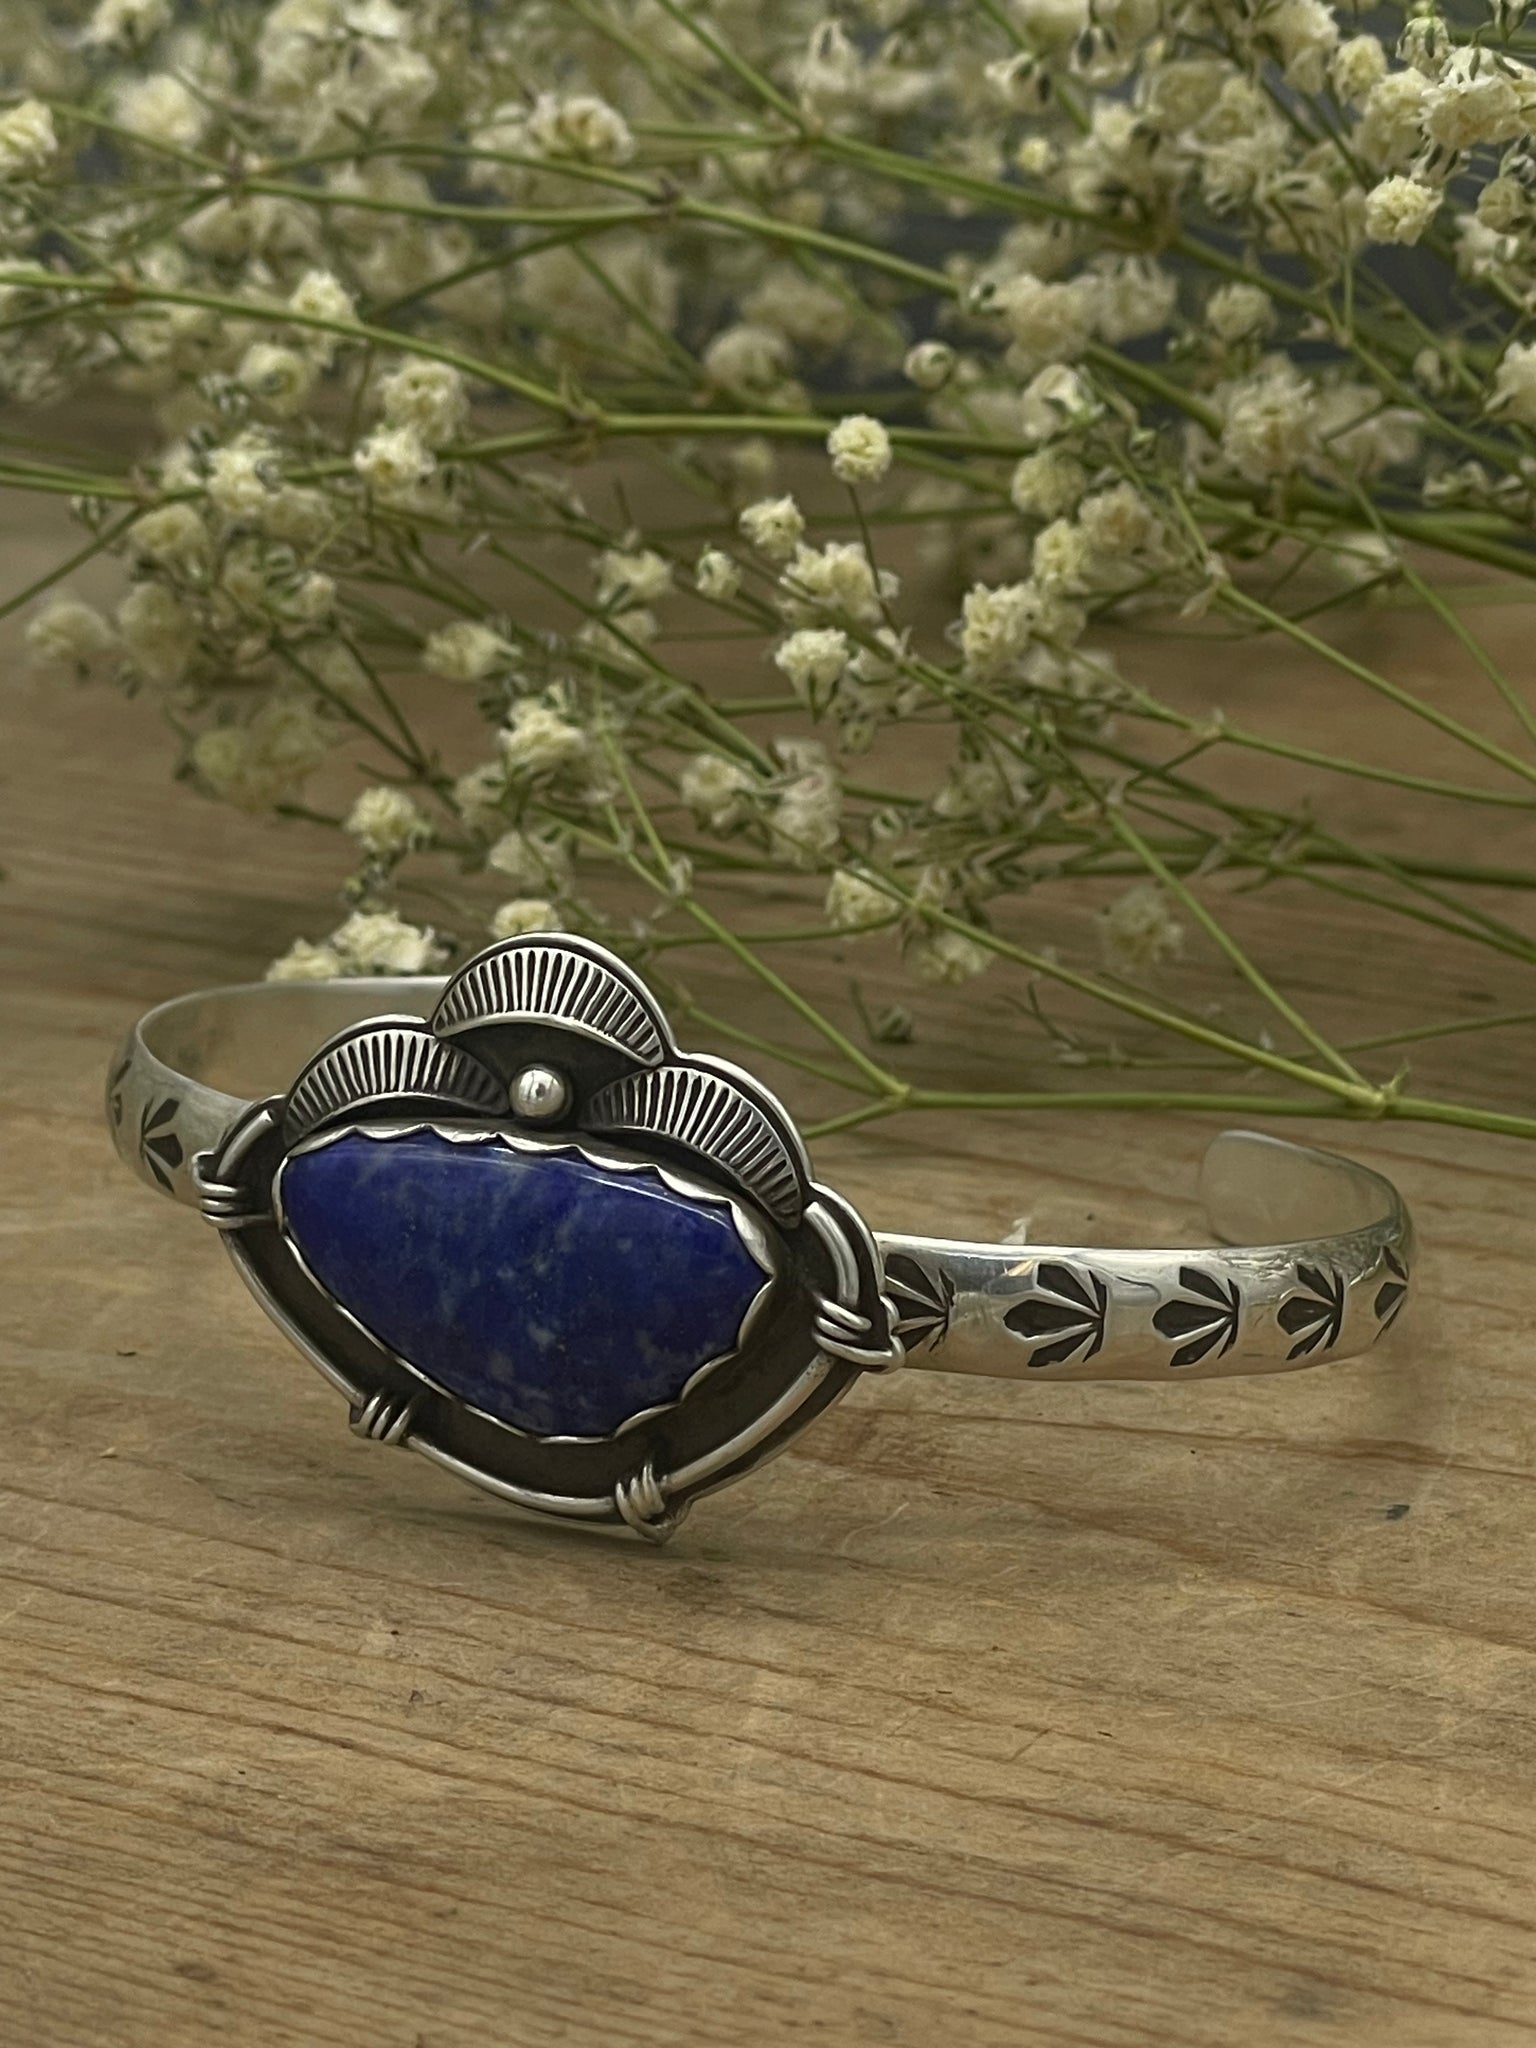 Steely Lapis Jewelry Clasp — Carbon County Historical Society & Museum